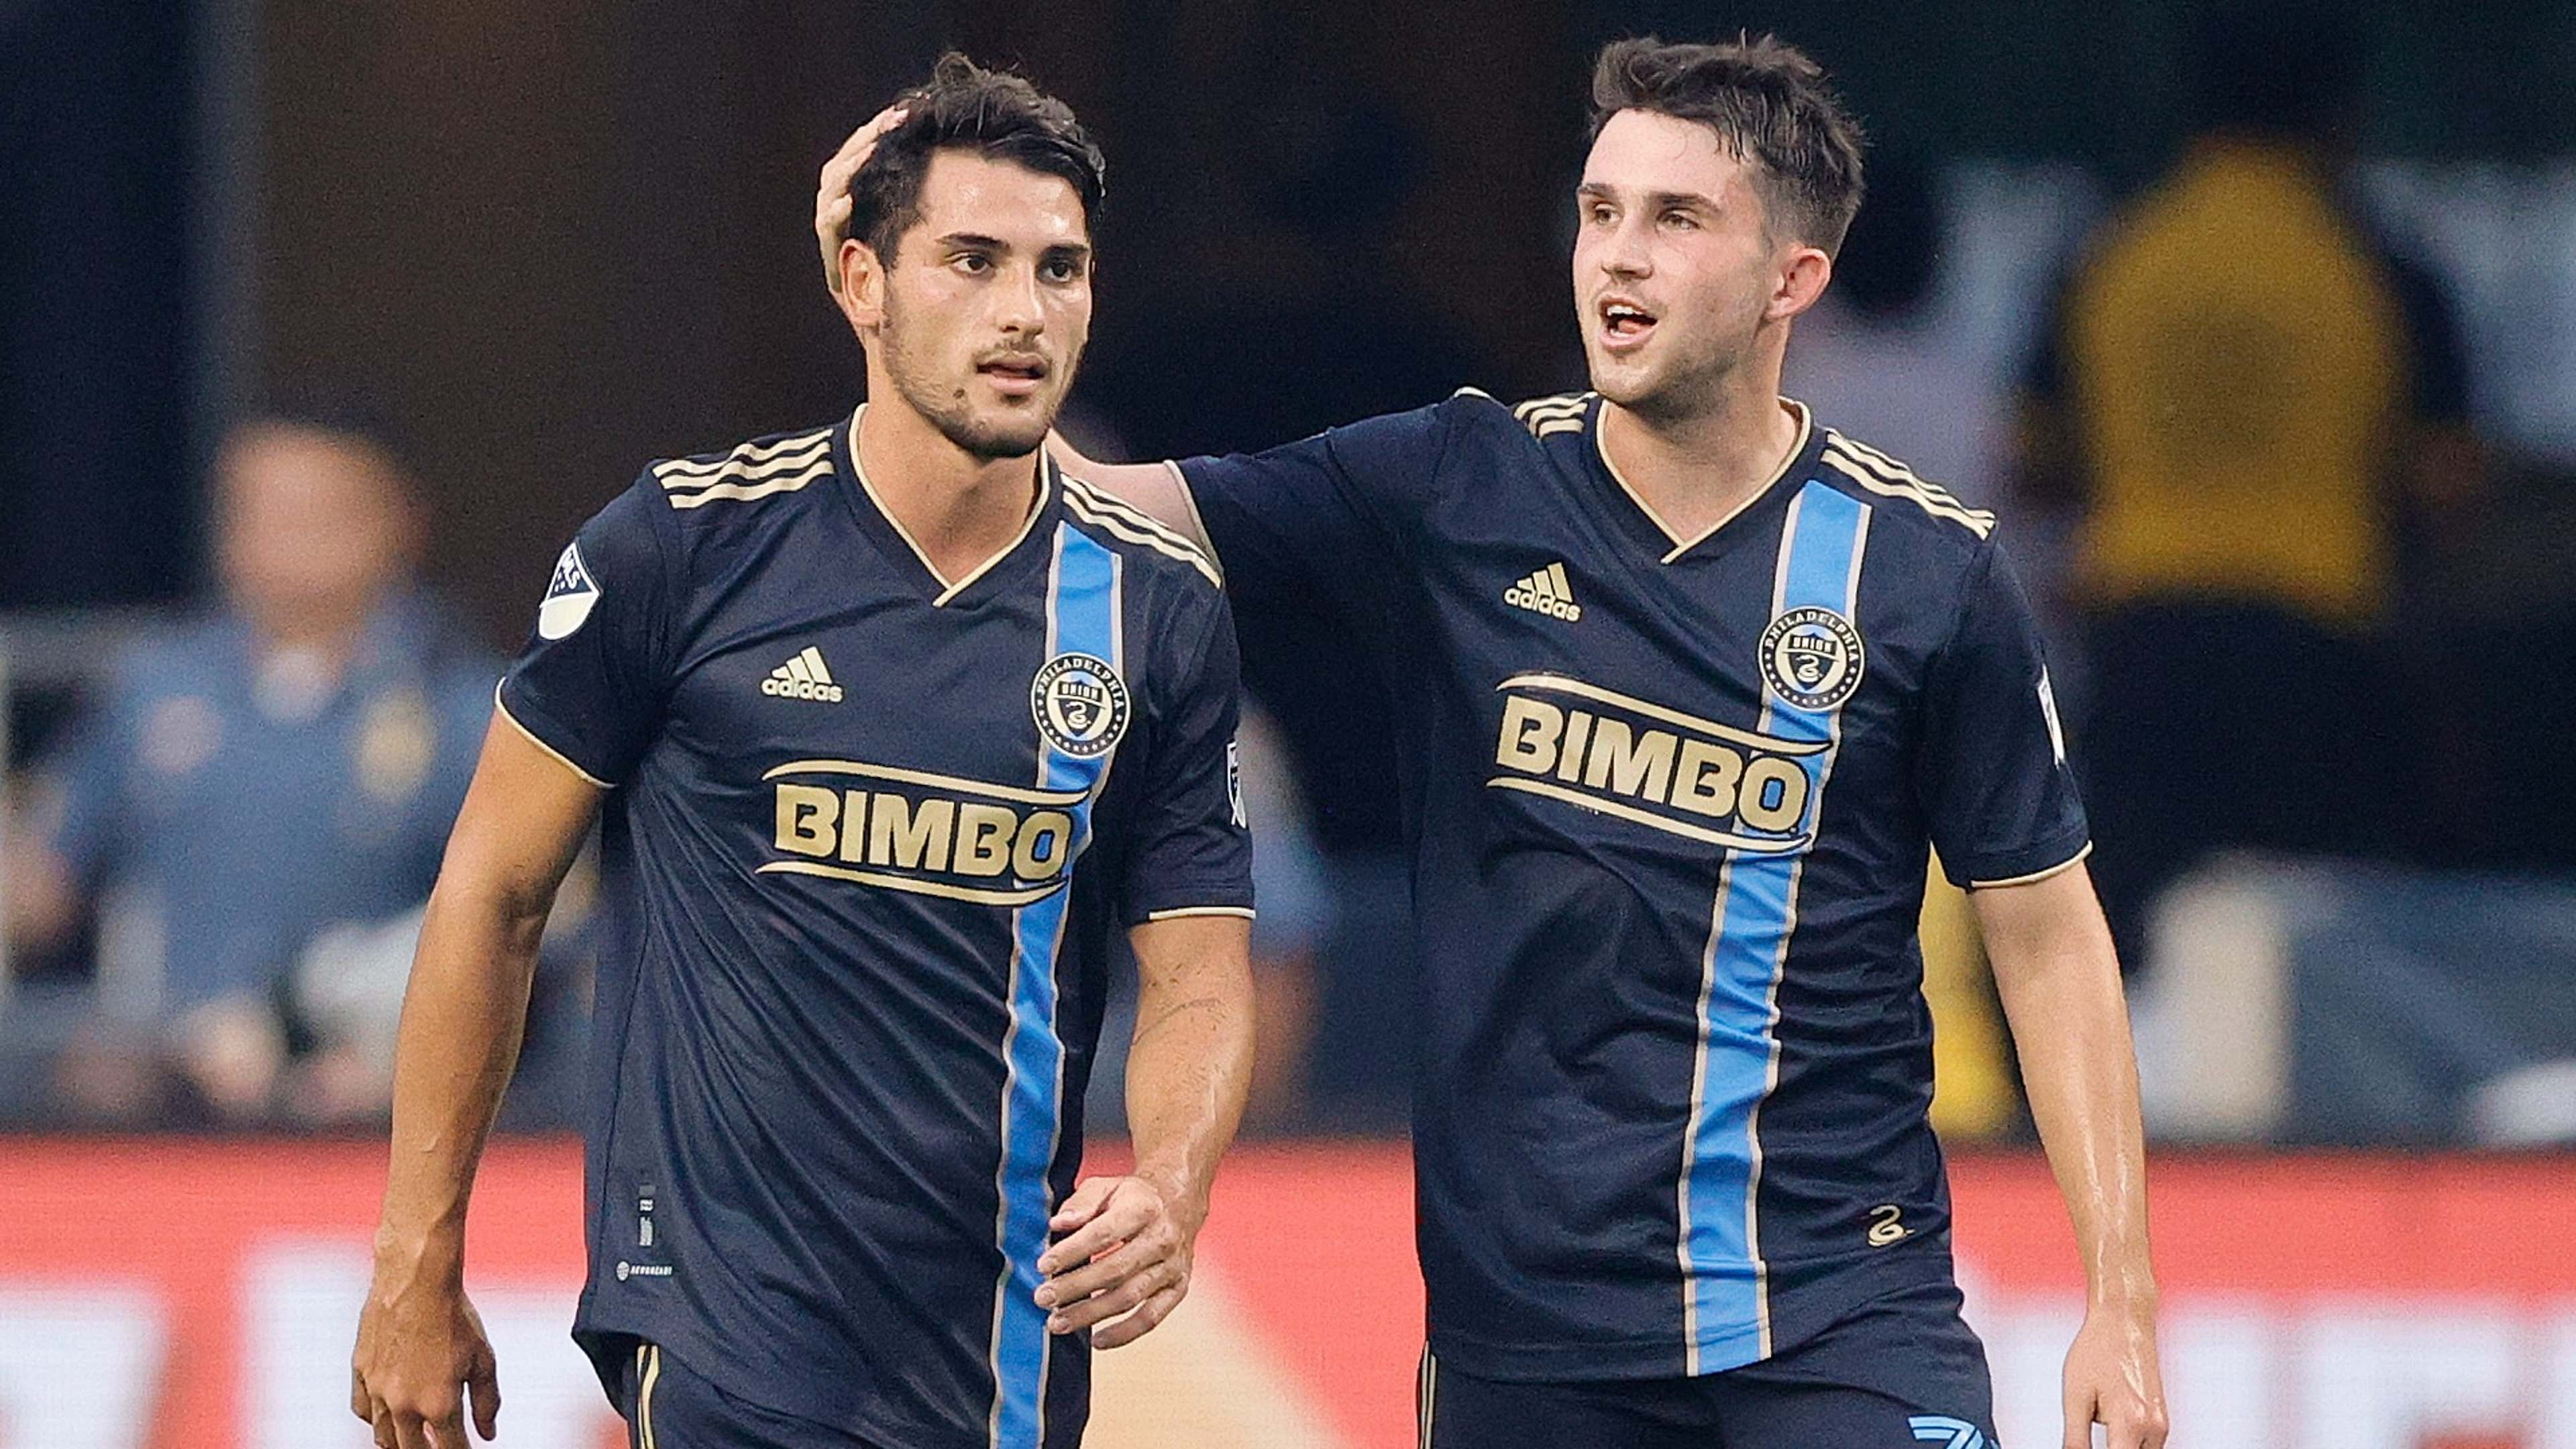 Battle of the Best: Winners and losers as Union take down 2021 MLS